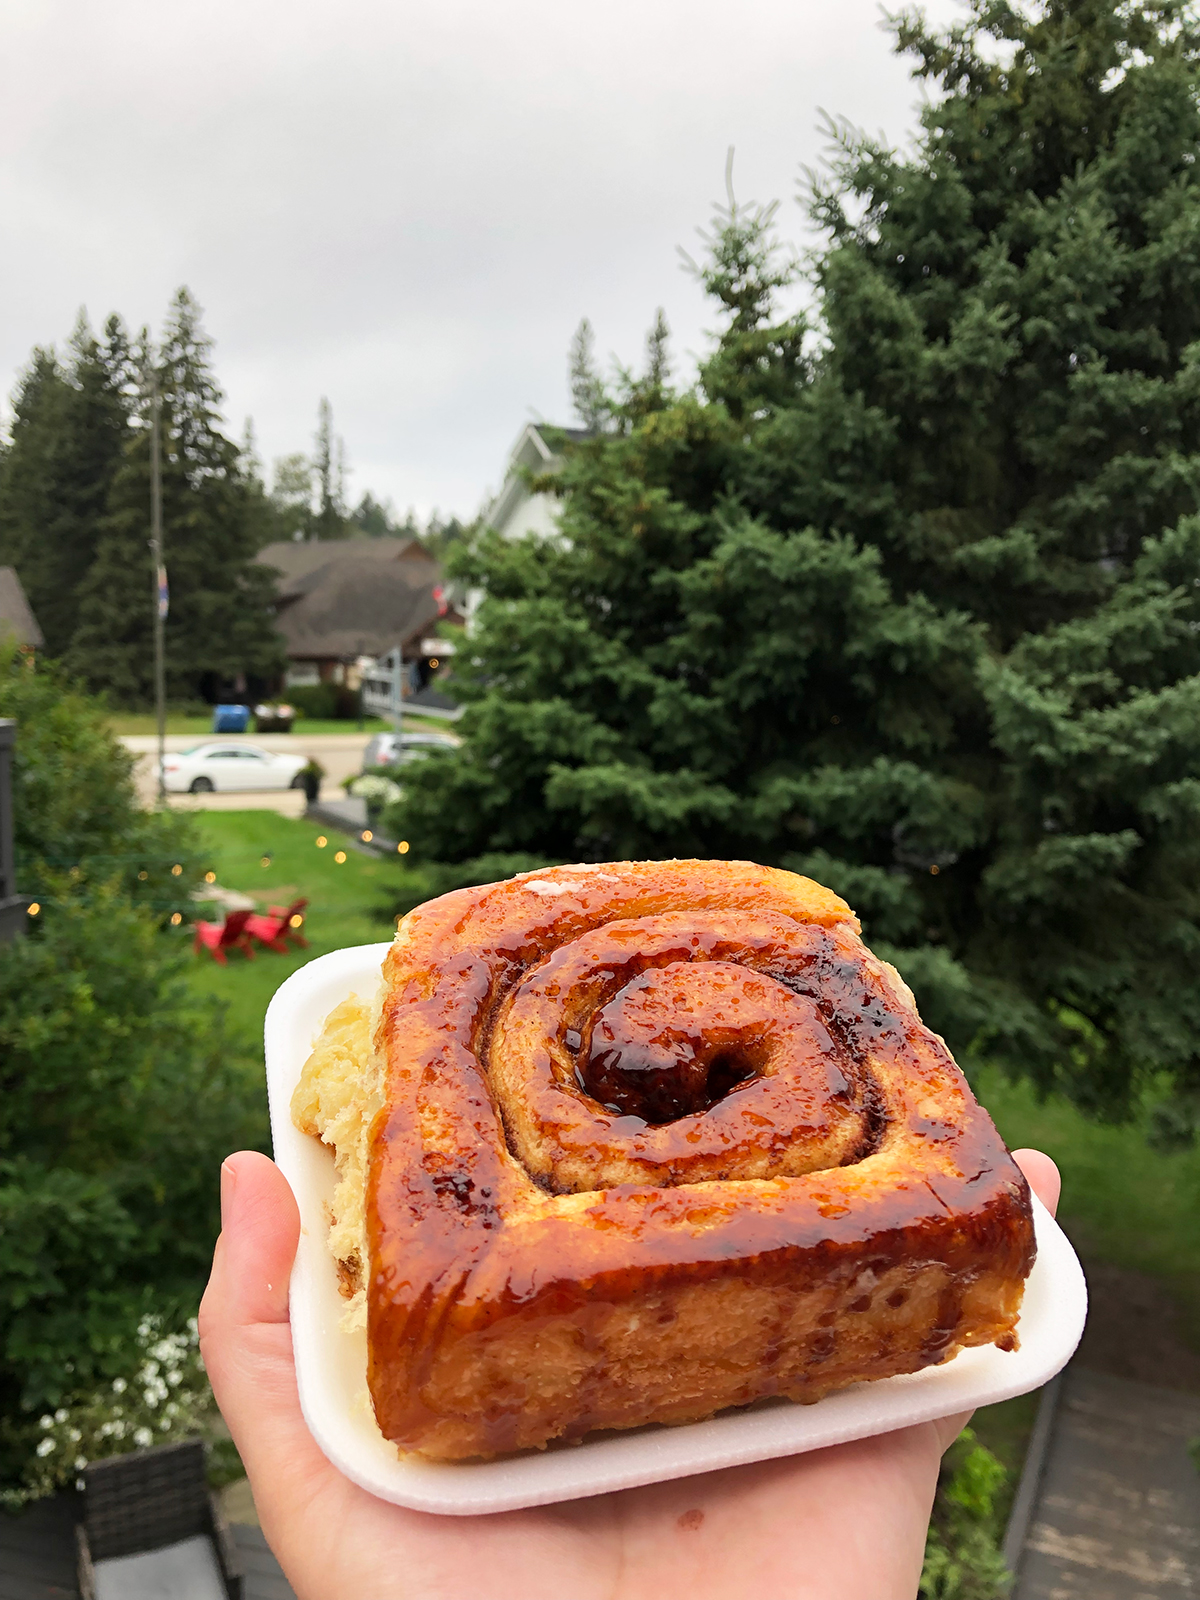 hand holding a square cinnamon roll on small plate with trees in distance